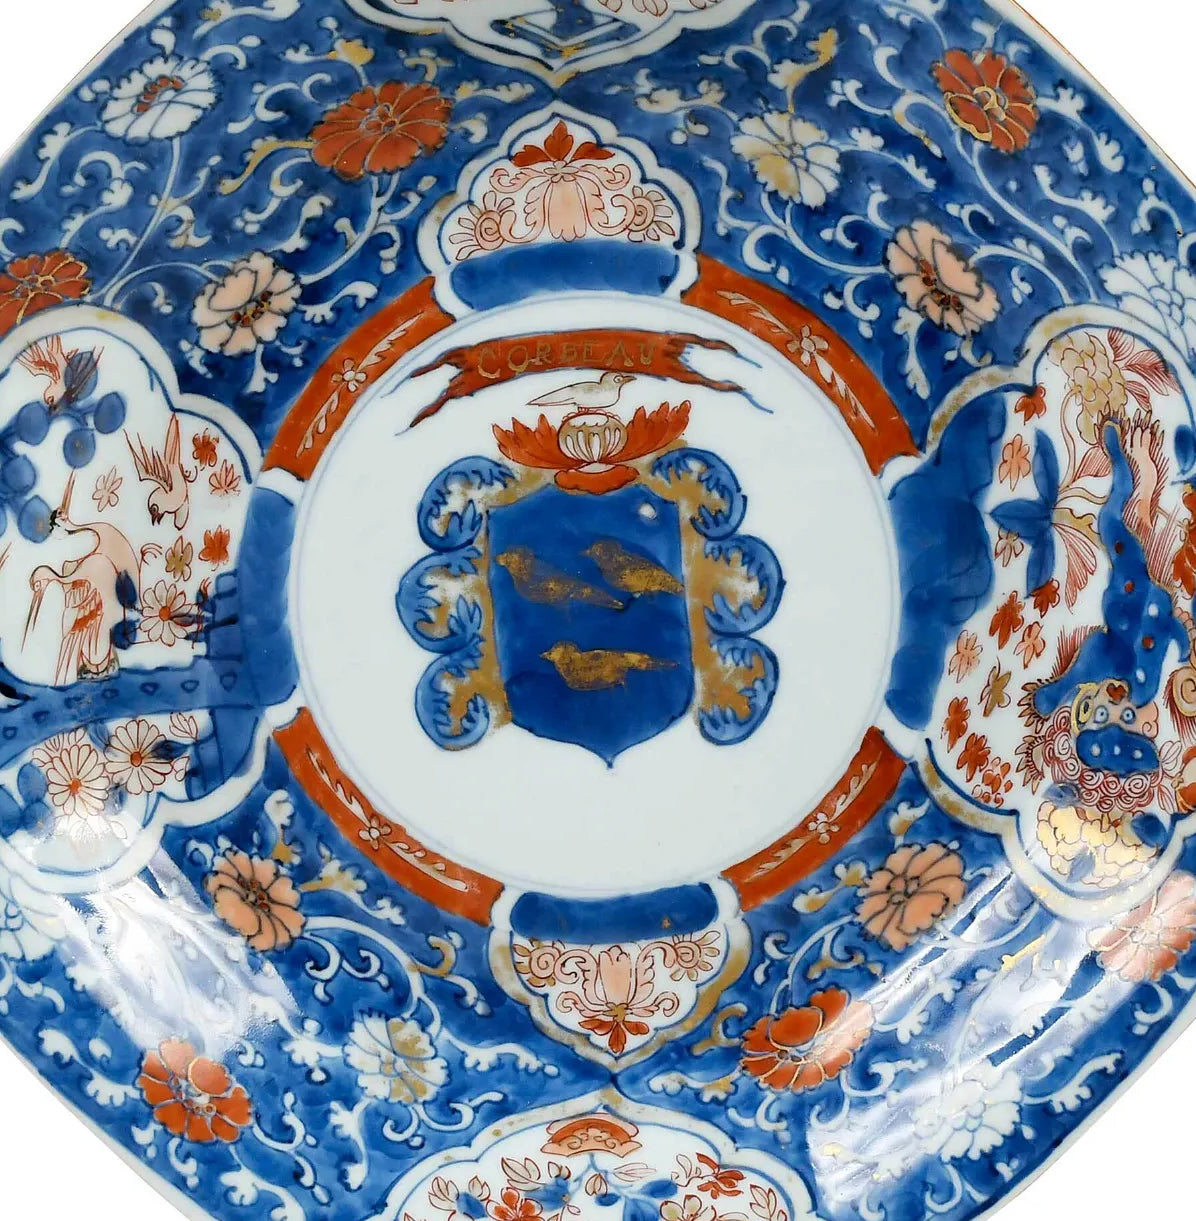 18th Century Chinese Export Armorial Charger 11 1/2 Inches for French Market "Corbeau"